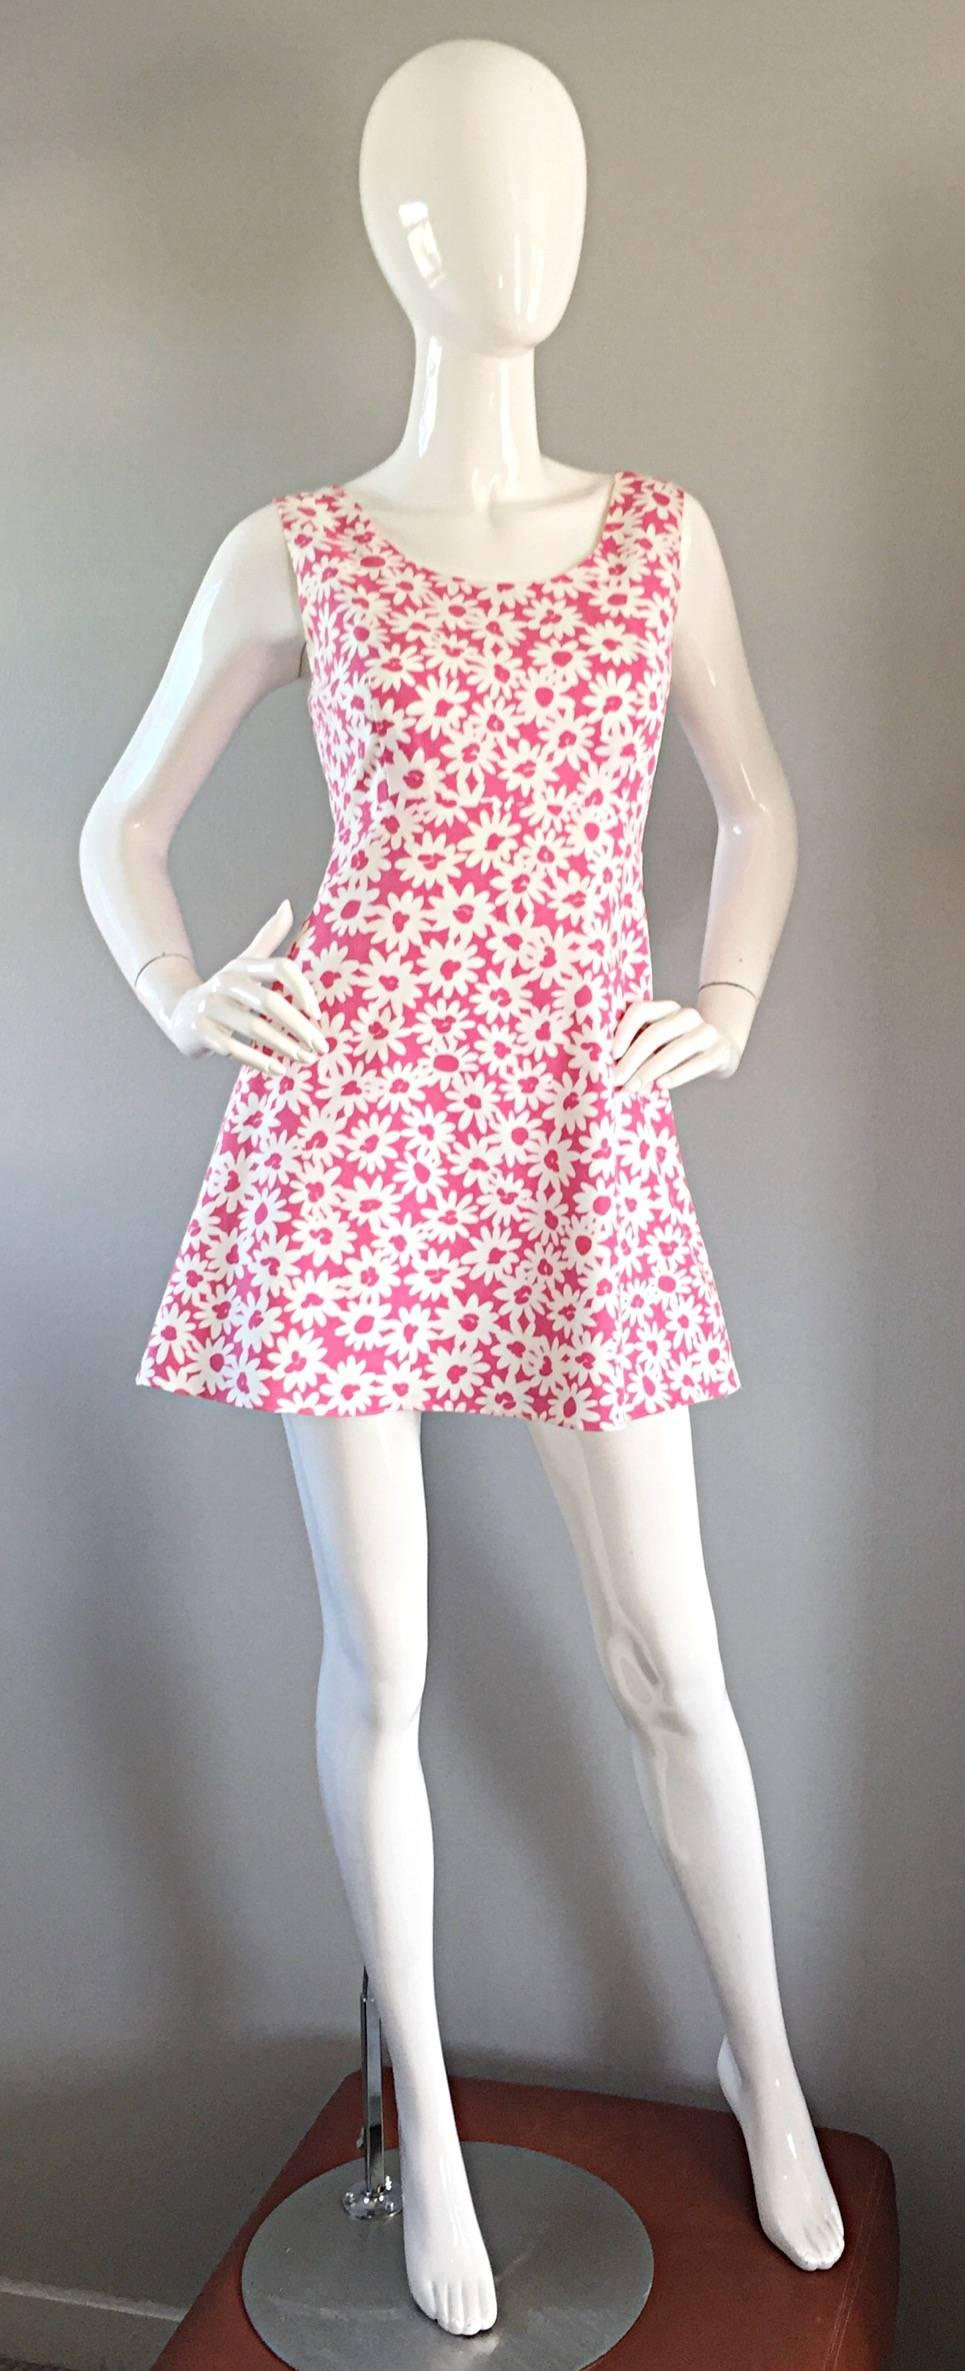 Adorable vintage JILL STUART pink and white daisy graffiti print A-Line babydoll dress! Wonderful flared hem, with a fitted bodice. Lightweight cotton, that is lined. Hidden zipper up the back, with hook-and-eye closure. Looks great belted or alone.